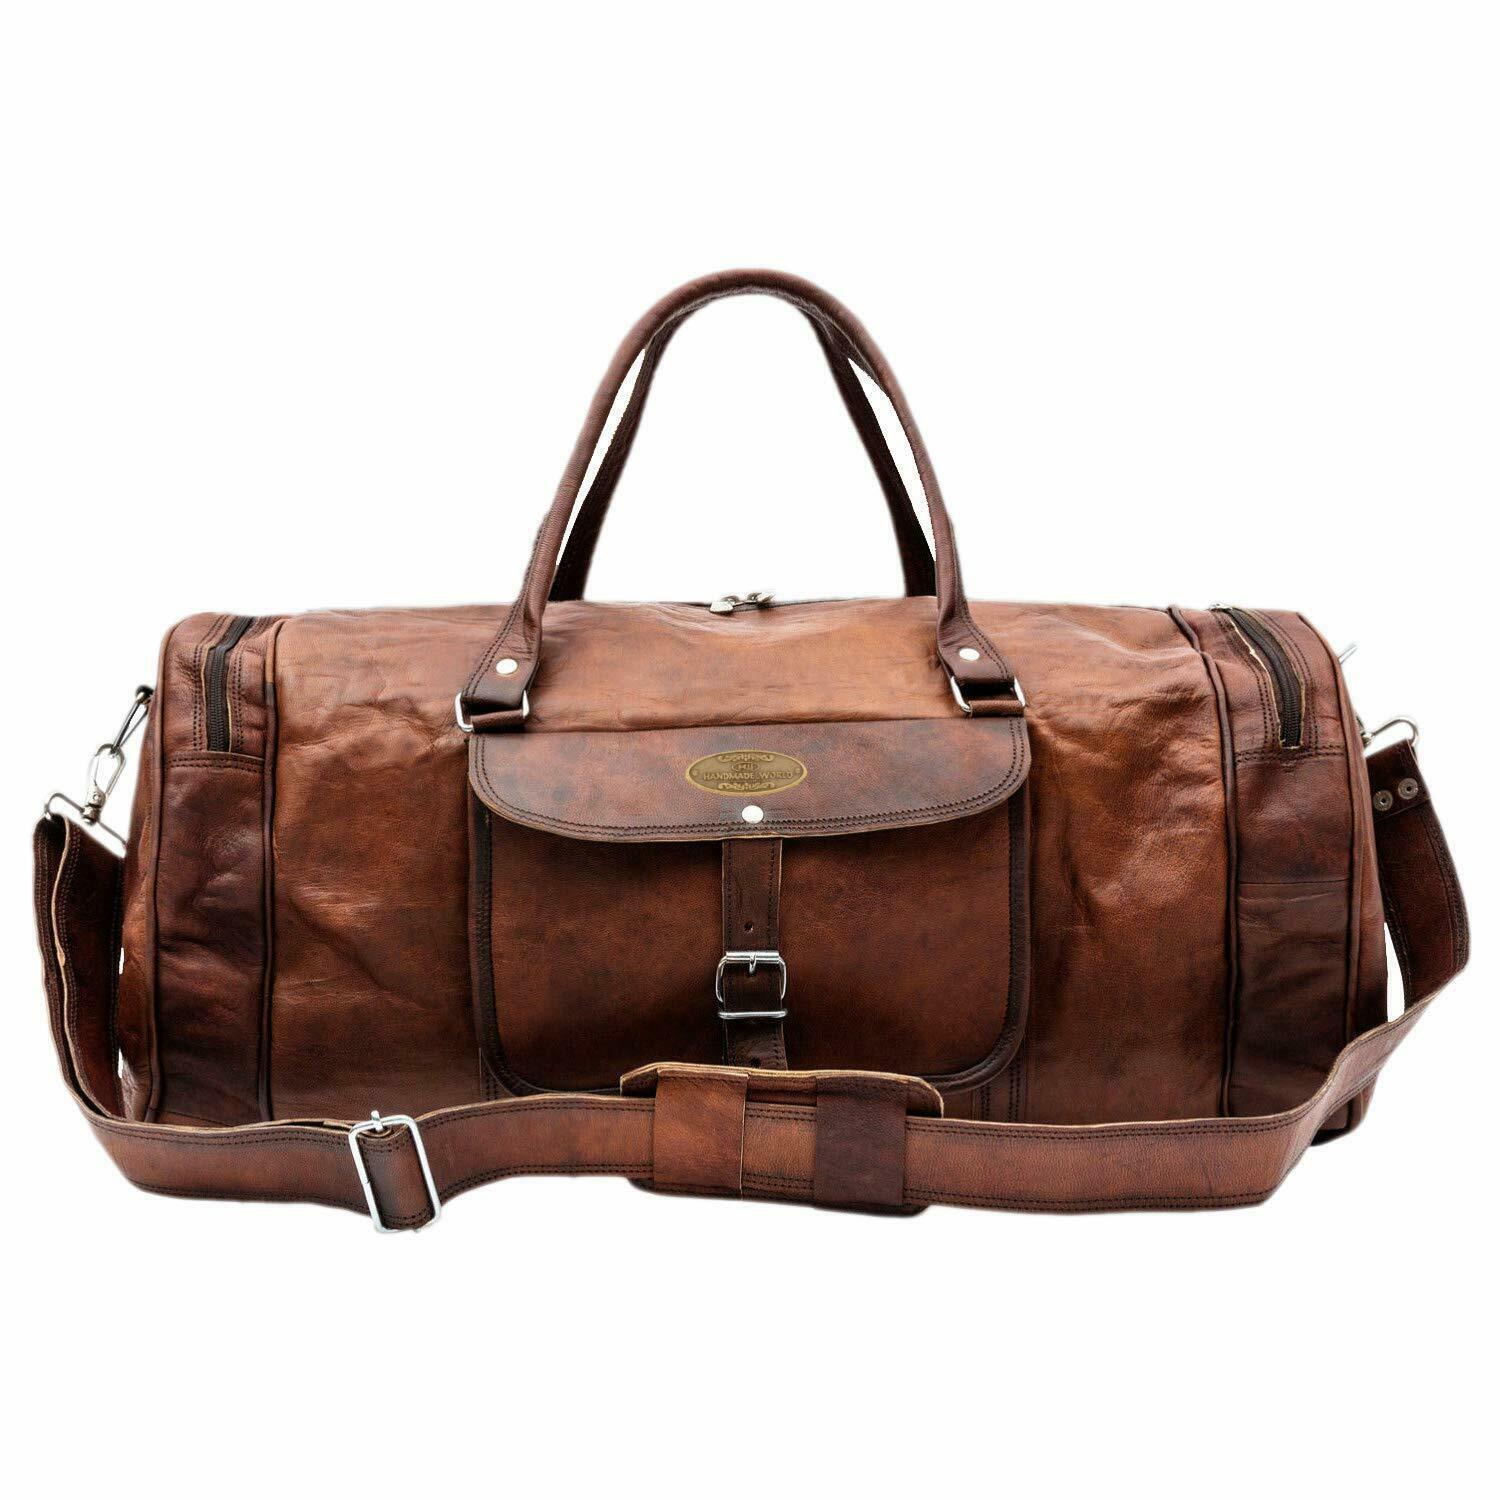 Large Travel Bag Men's Real Leather Travel Weekend Duffle Bag - Luggage